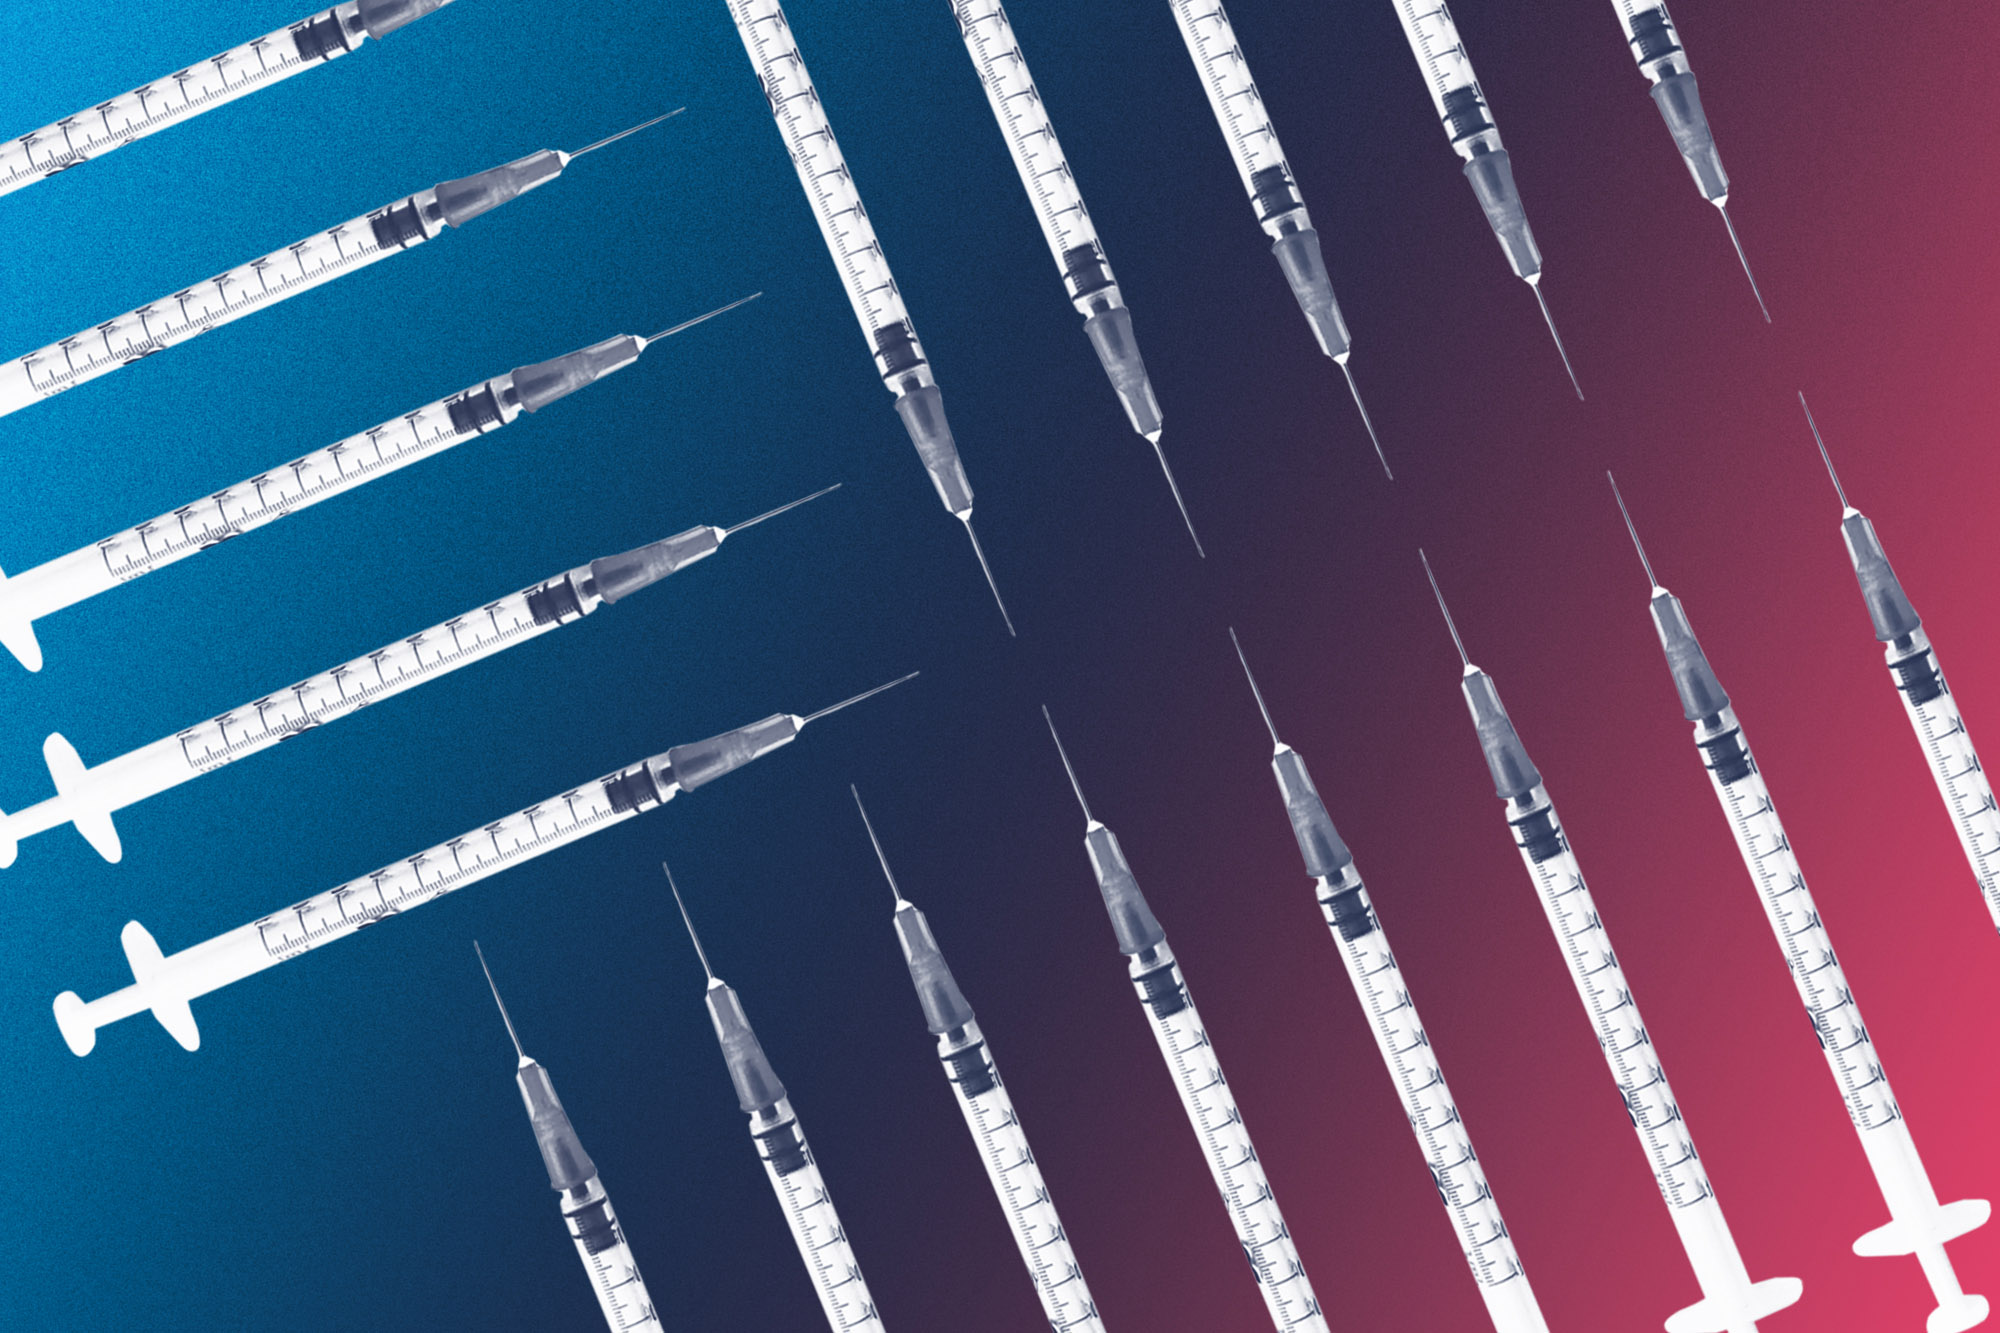 Illustration with 18 syringes